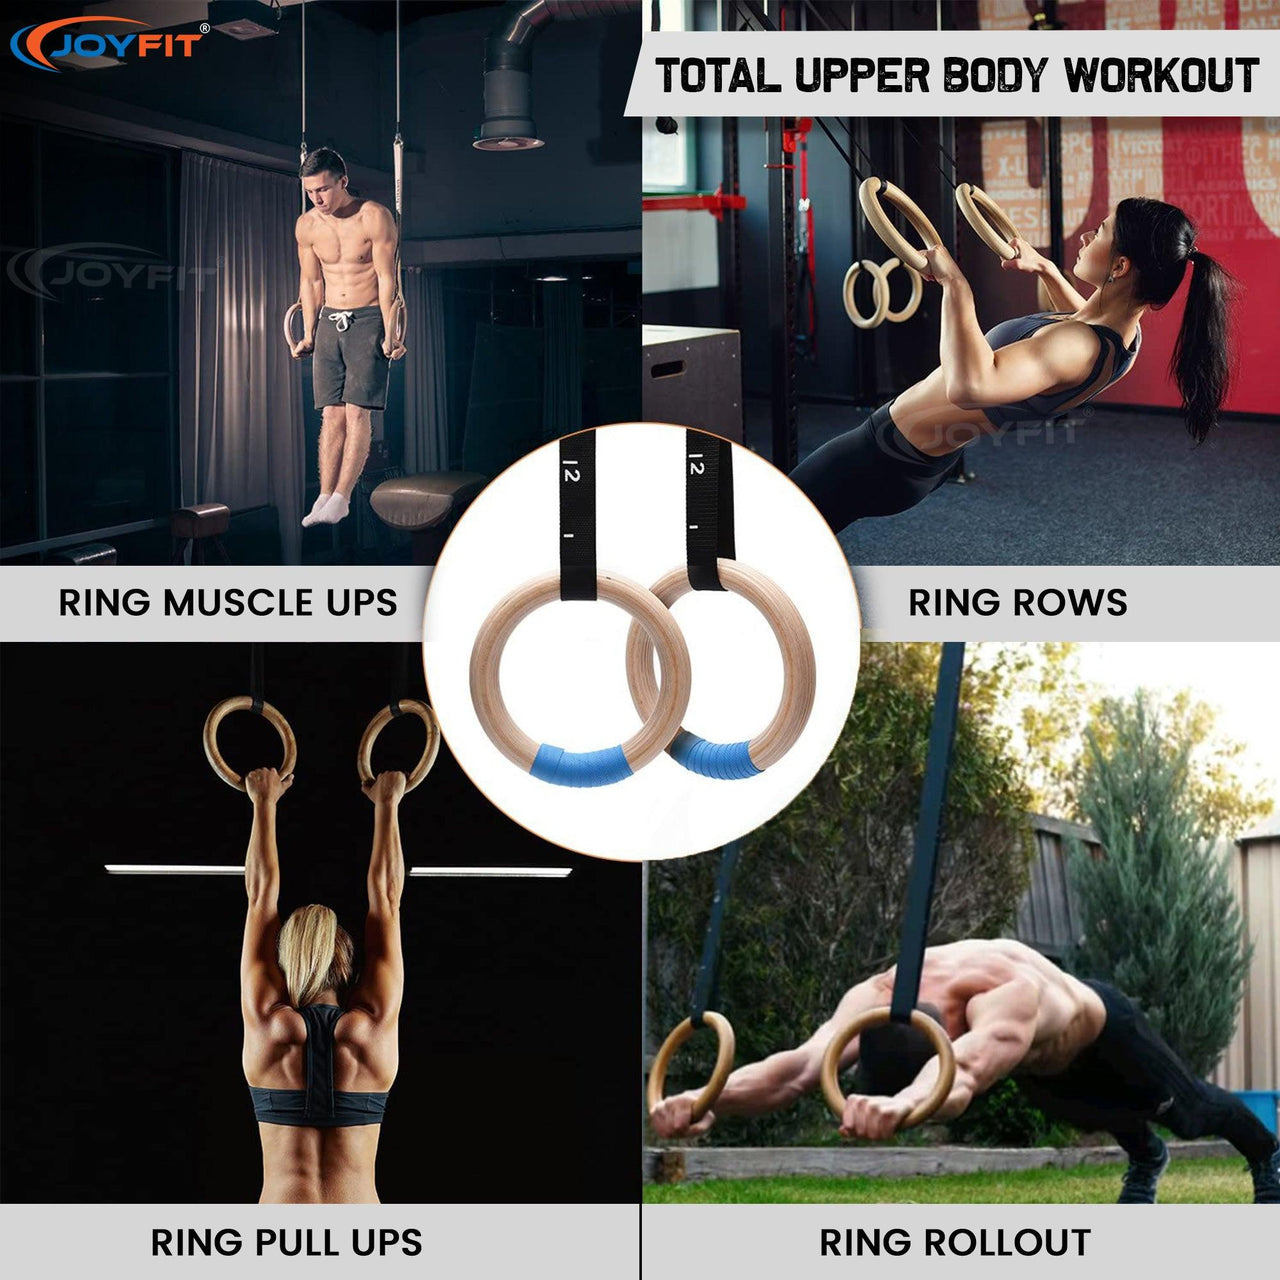 Rings Training Guide | PDF | Strength Training | Physical Exercise